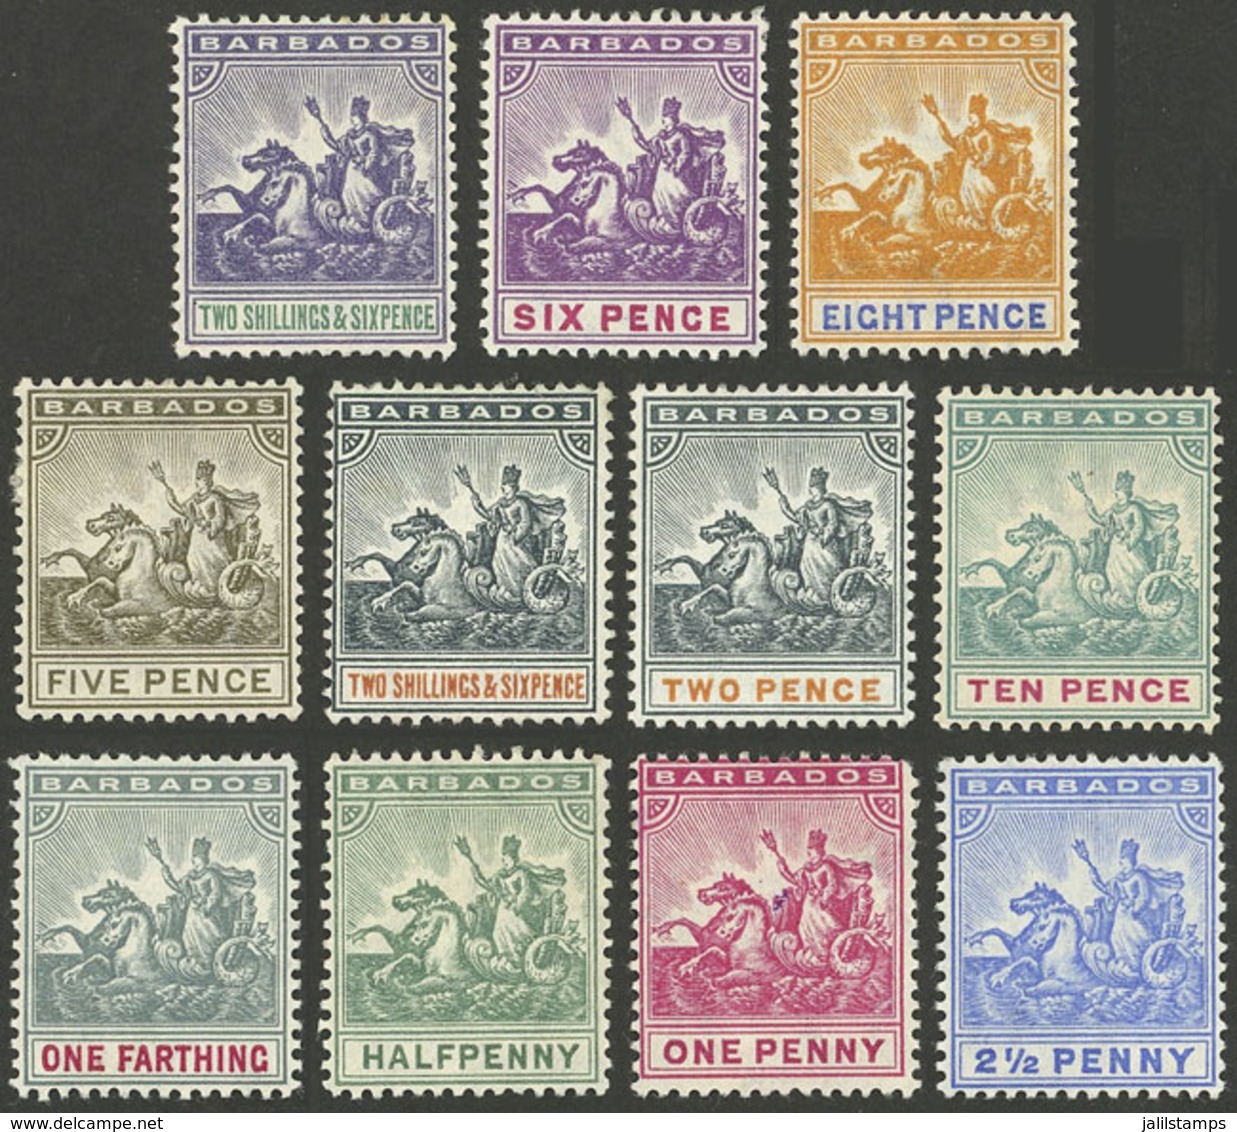 BARBADOS: Sc.76 + Other Values, 11 Values Issued Between 1892 And 1910, Mint Lightly Hinged, VF Quality, Catalog V - Barbados (...-1966)